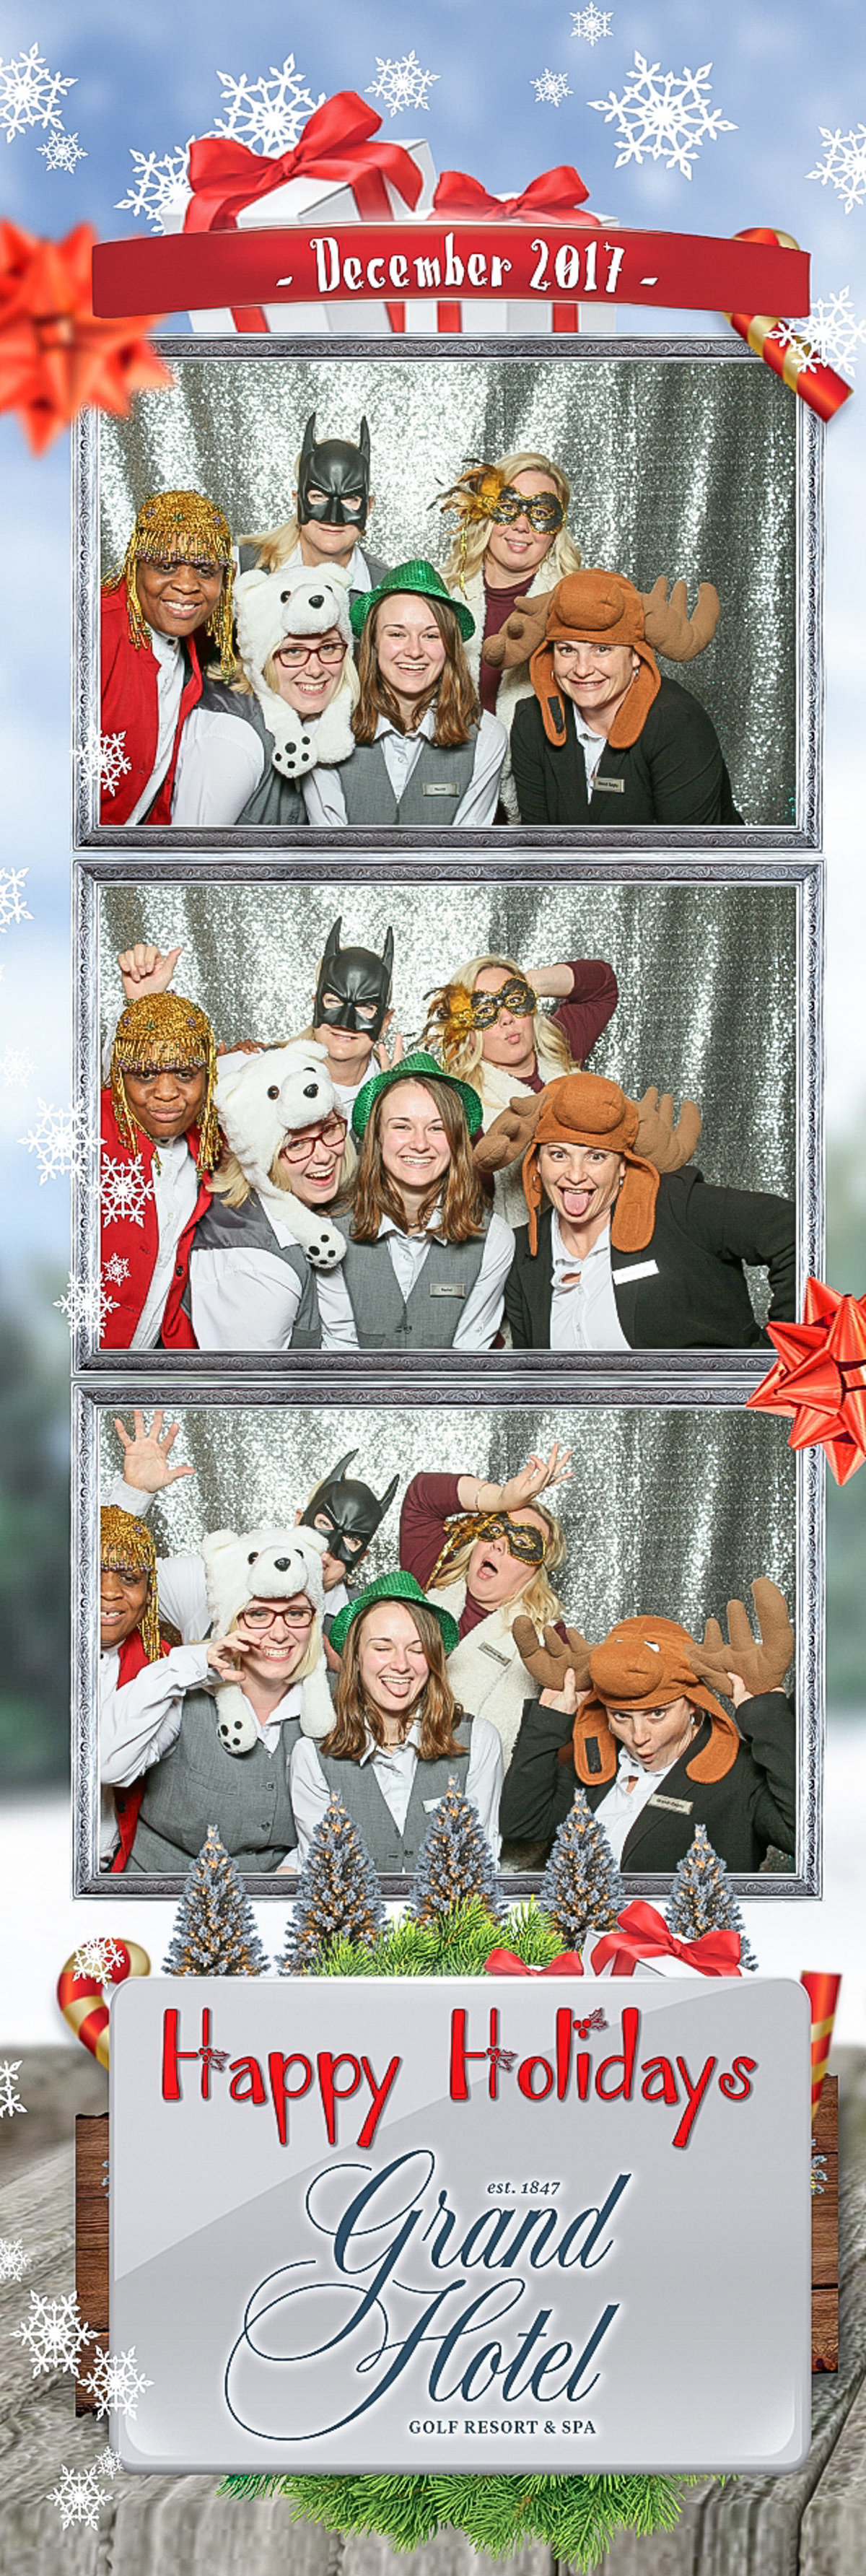 Photo booth for the employees at The Grand Hotel in Point Clear, Alabama.